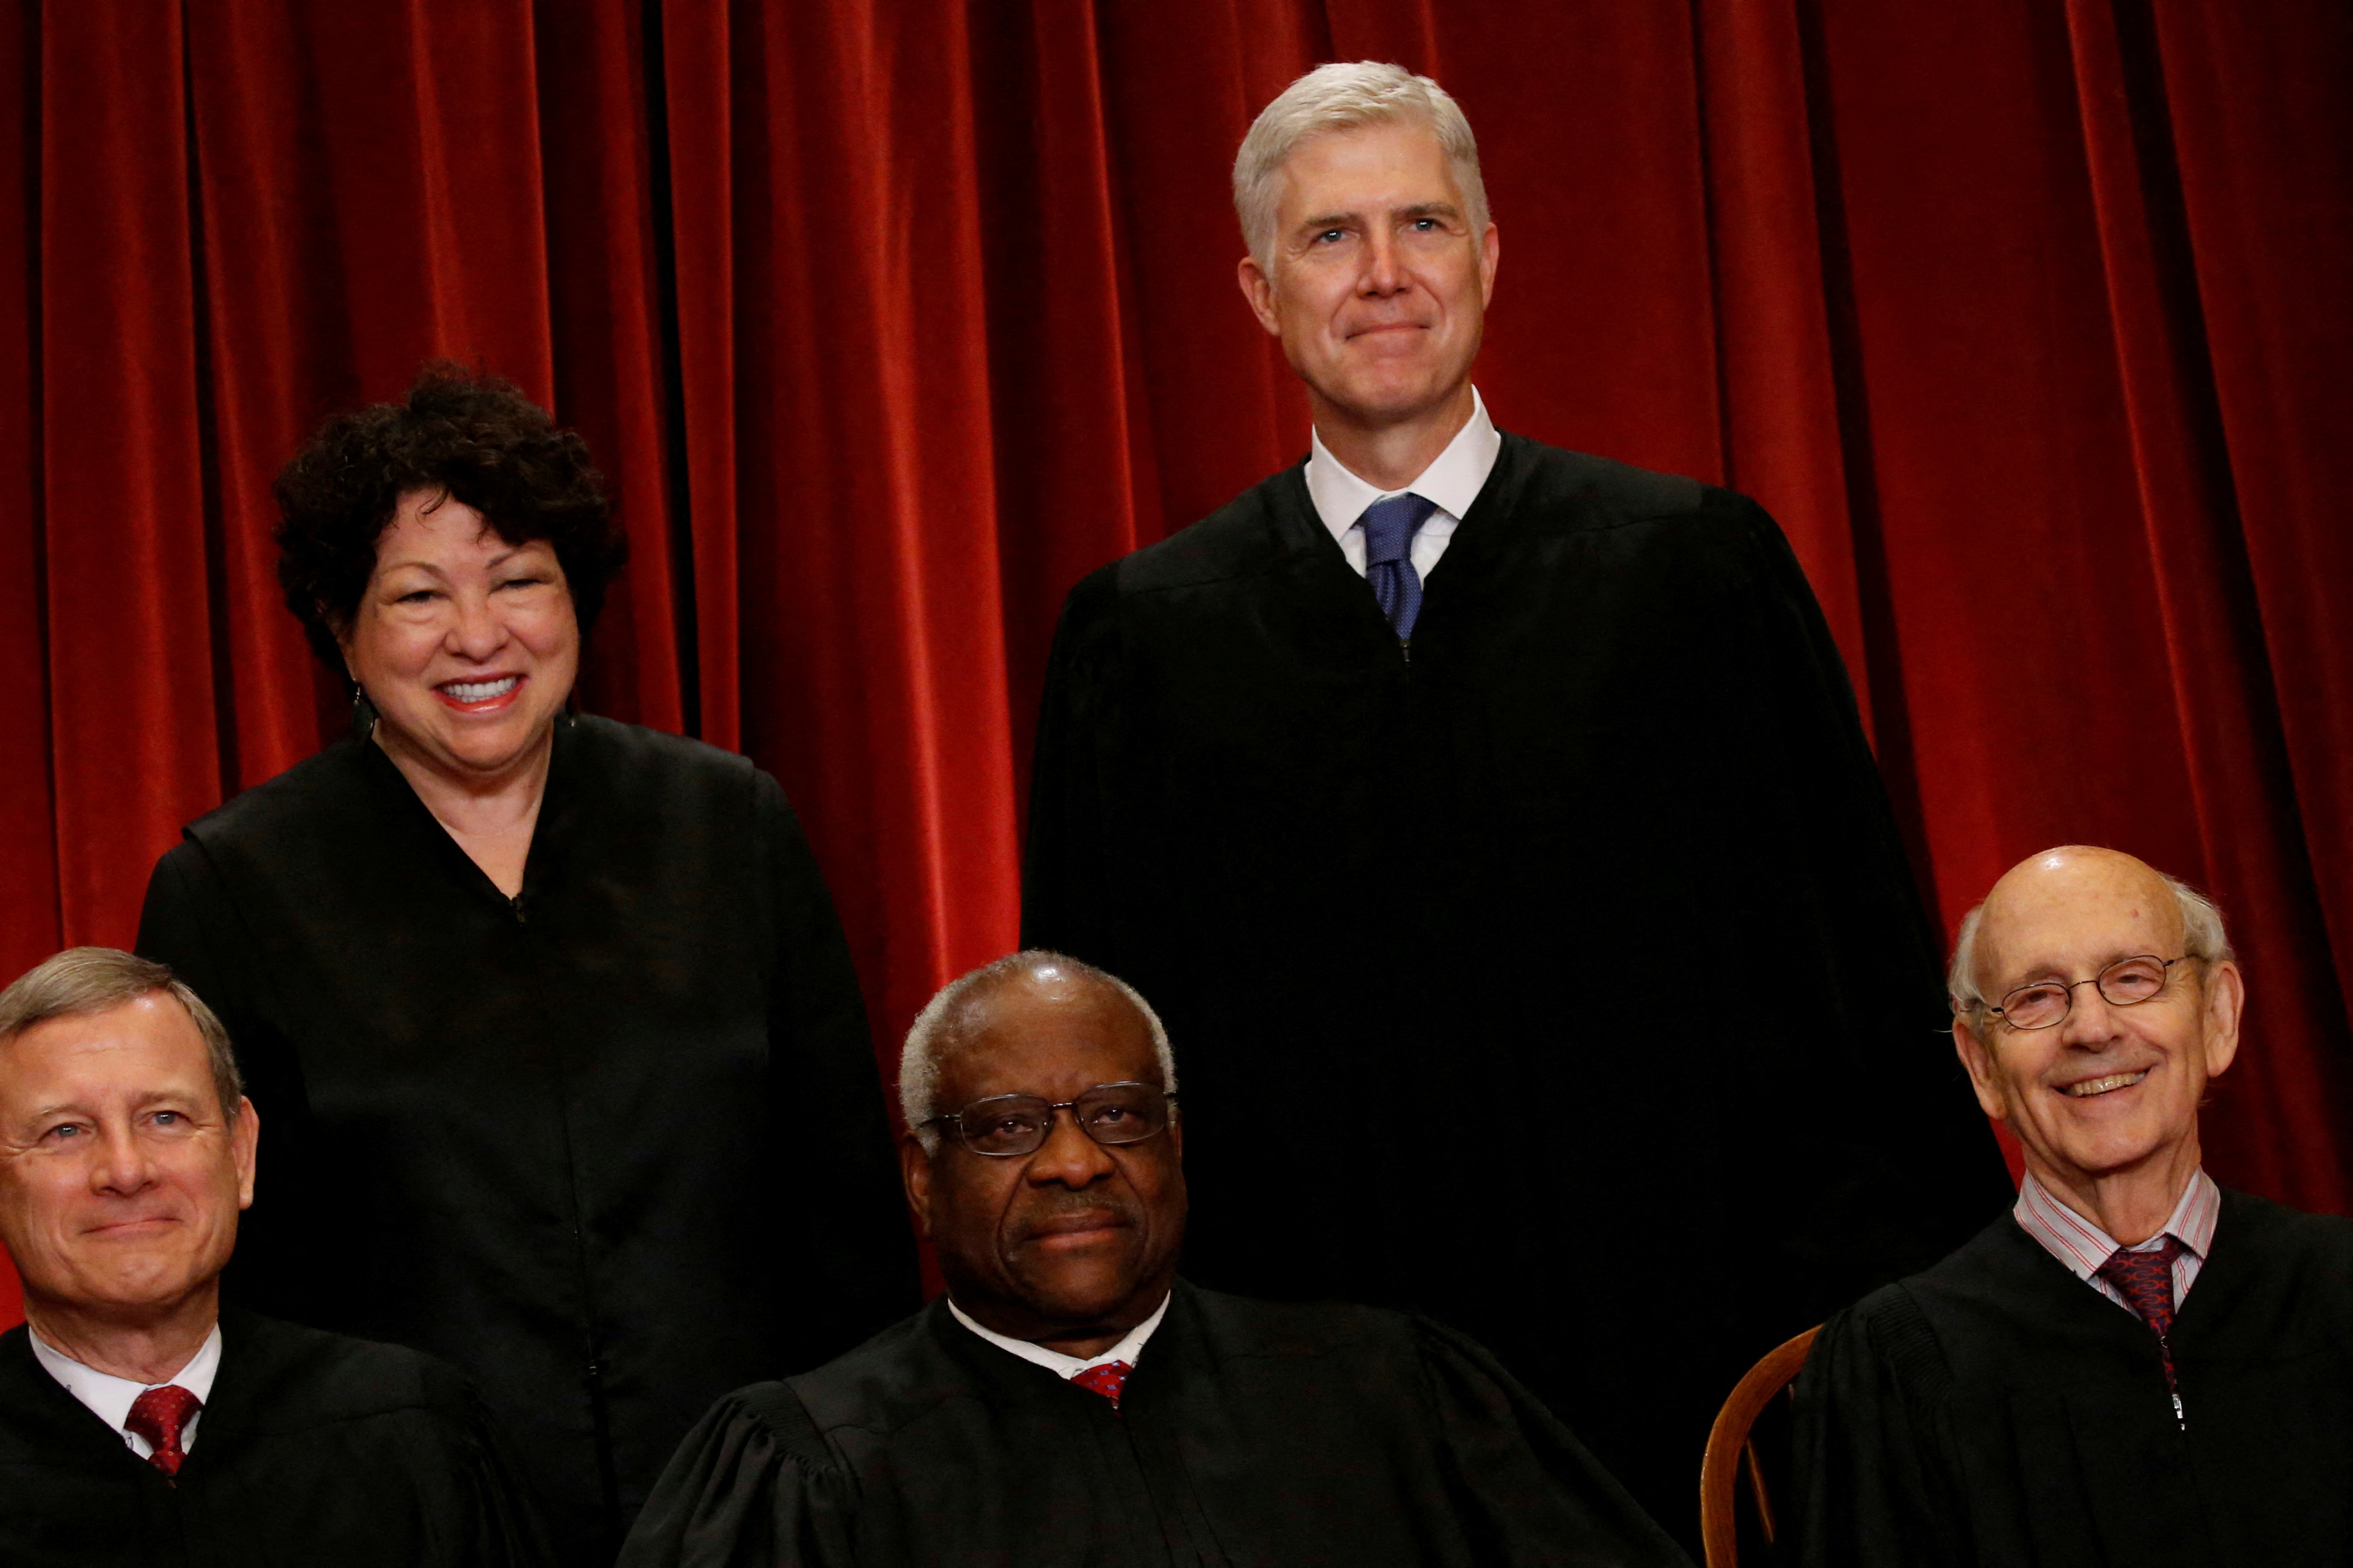 Gorsuch smiles as he joins his fellow justices for a new U.S. Supreme Court family photo including him, their most recent addition, at the Supreme Court building in Washington